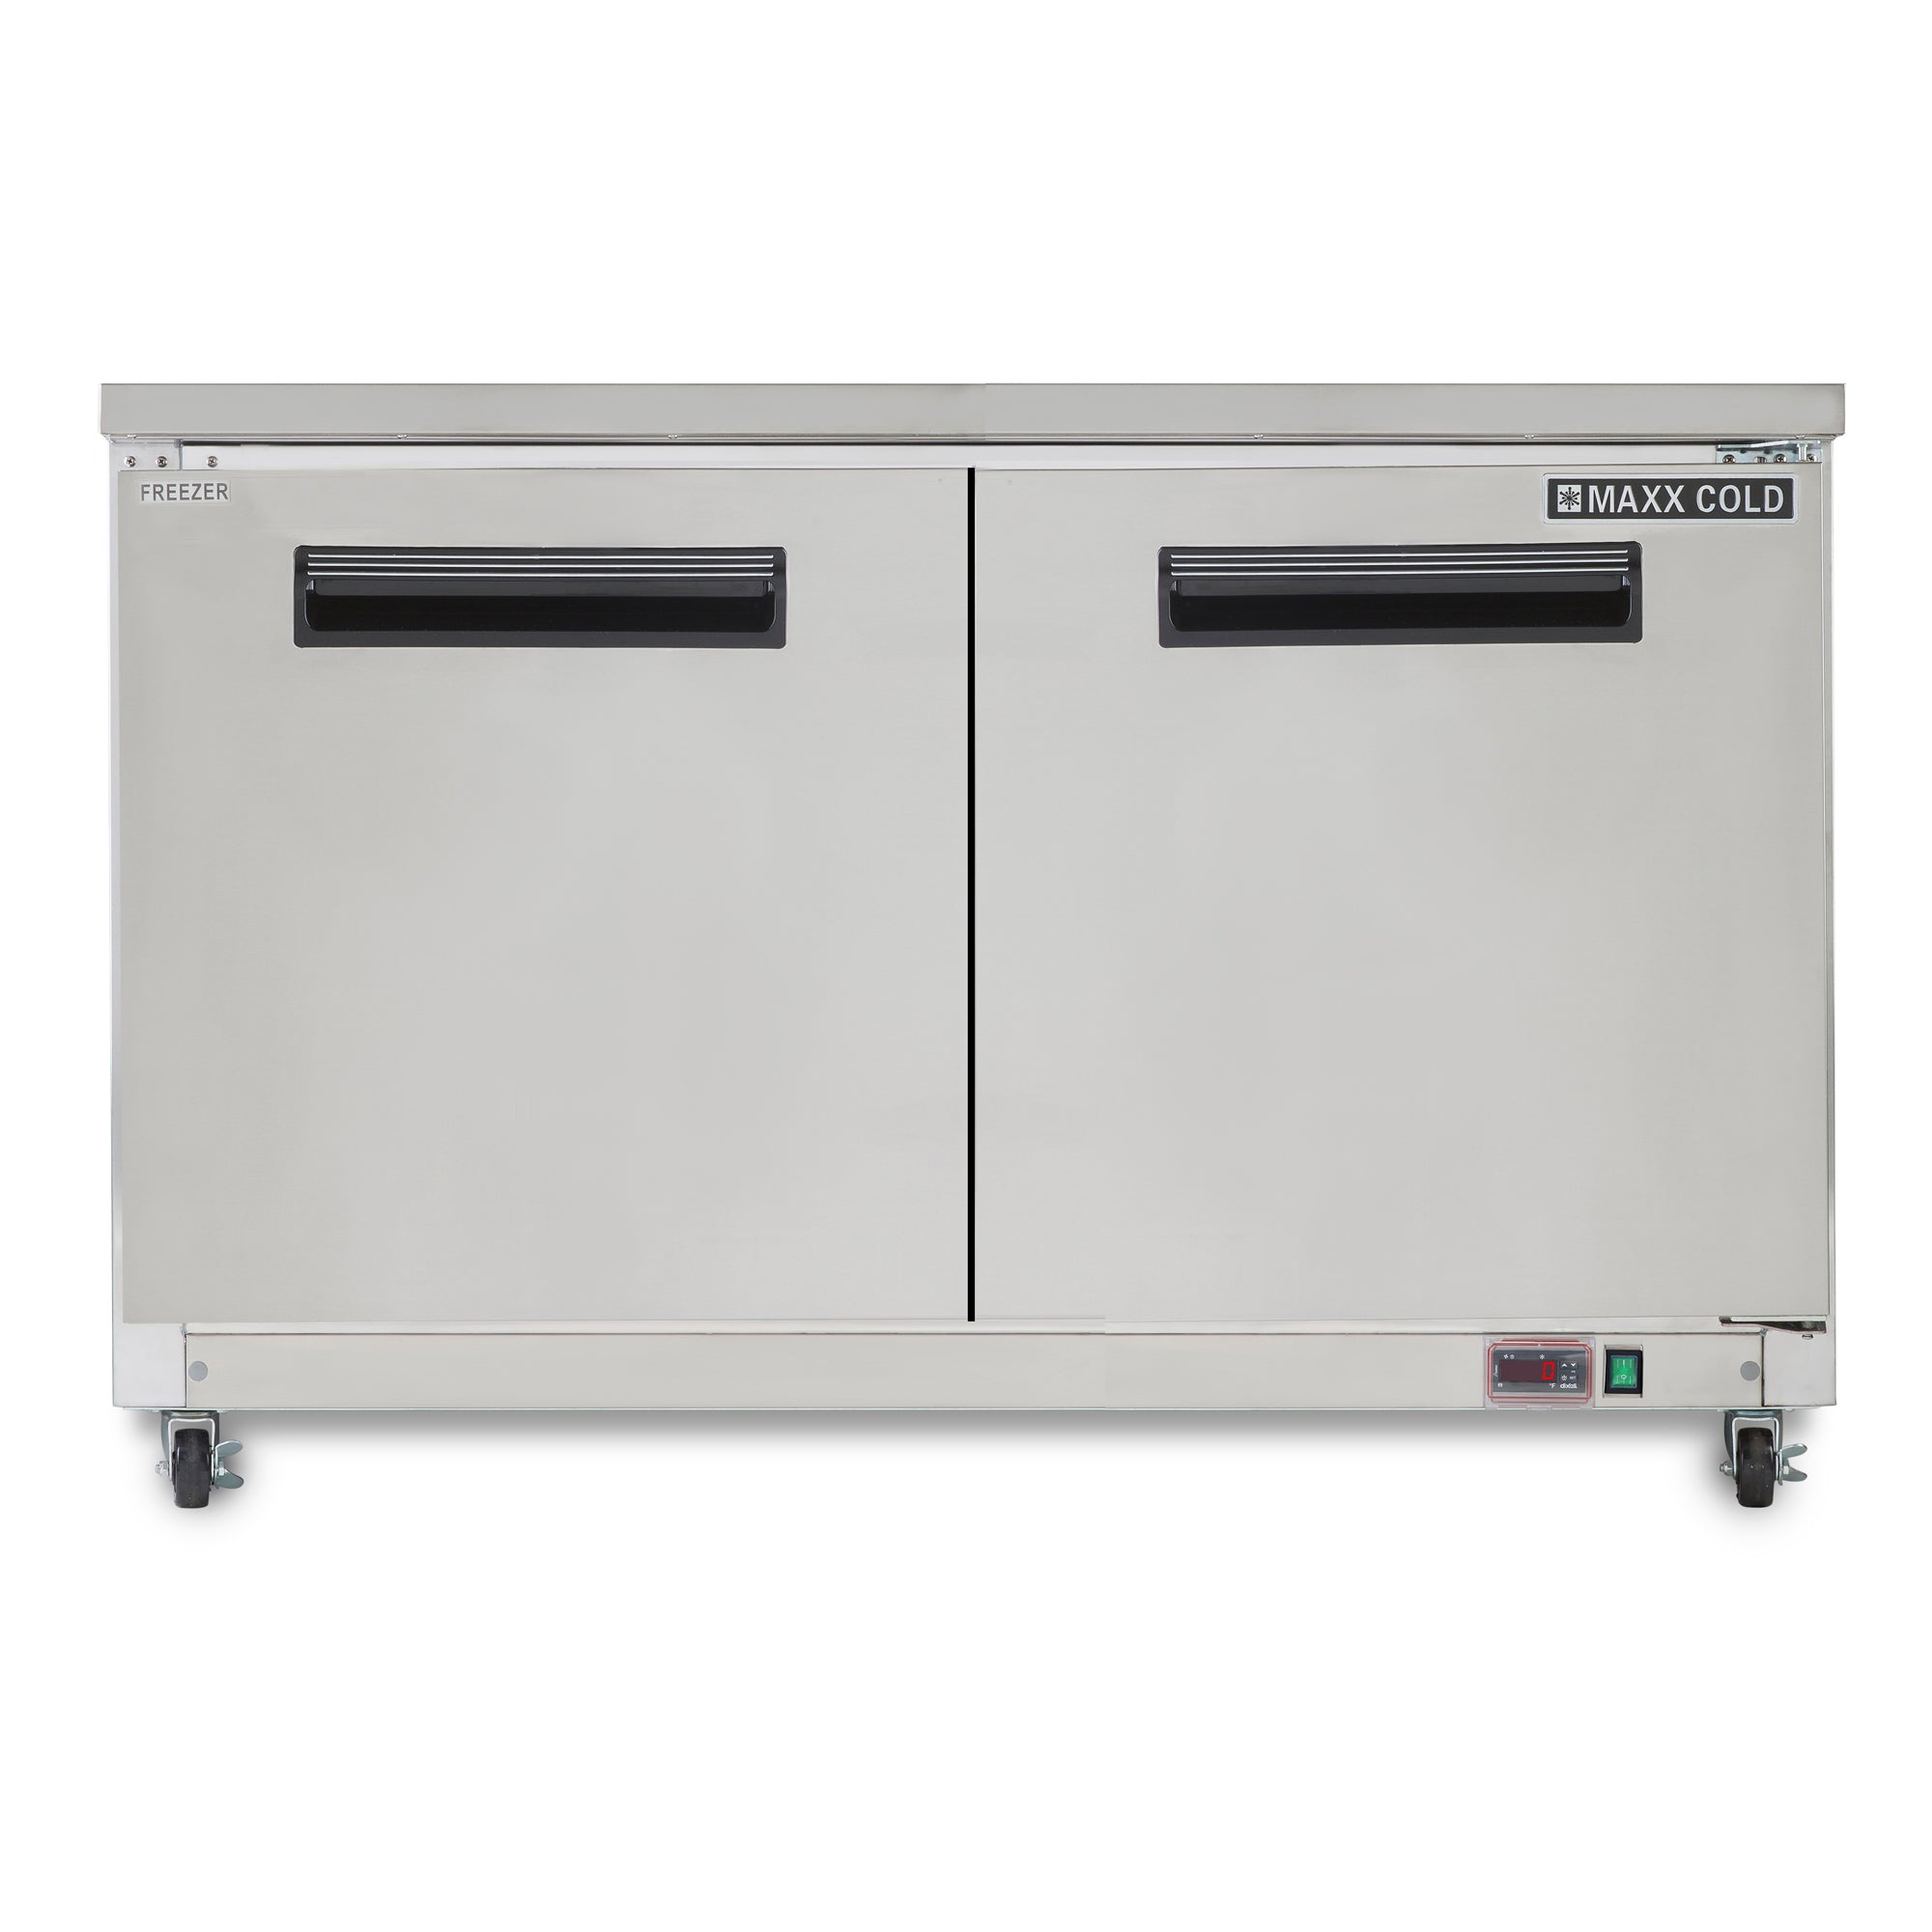 Maxx Cold - MXCF48UHC, Maxx Cold Double Door Undercounter Freezer, 48.3"W, 12 cu. ft. Storage Capacity, in Stainless Steel